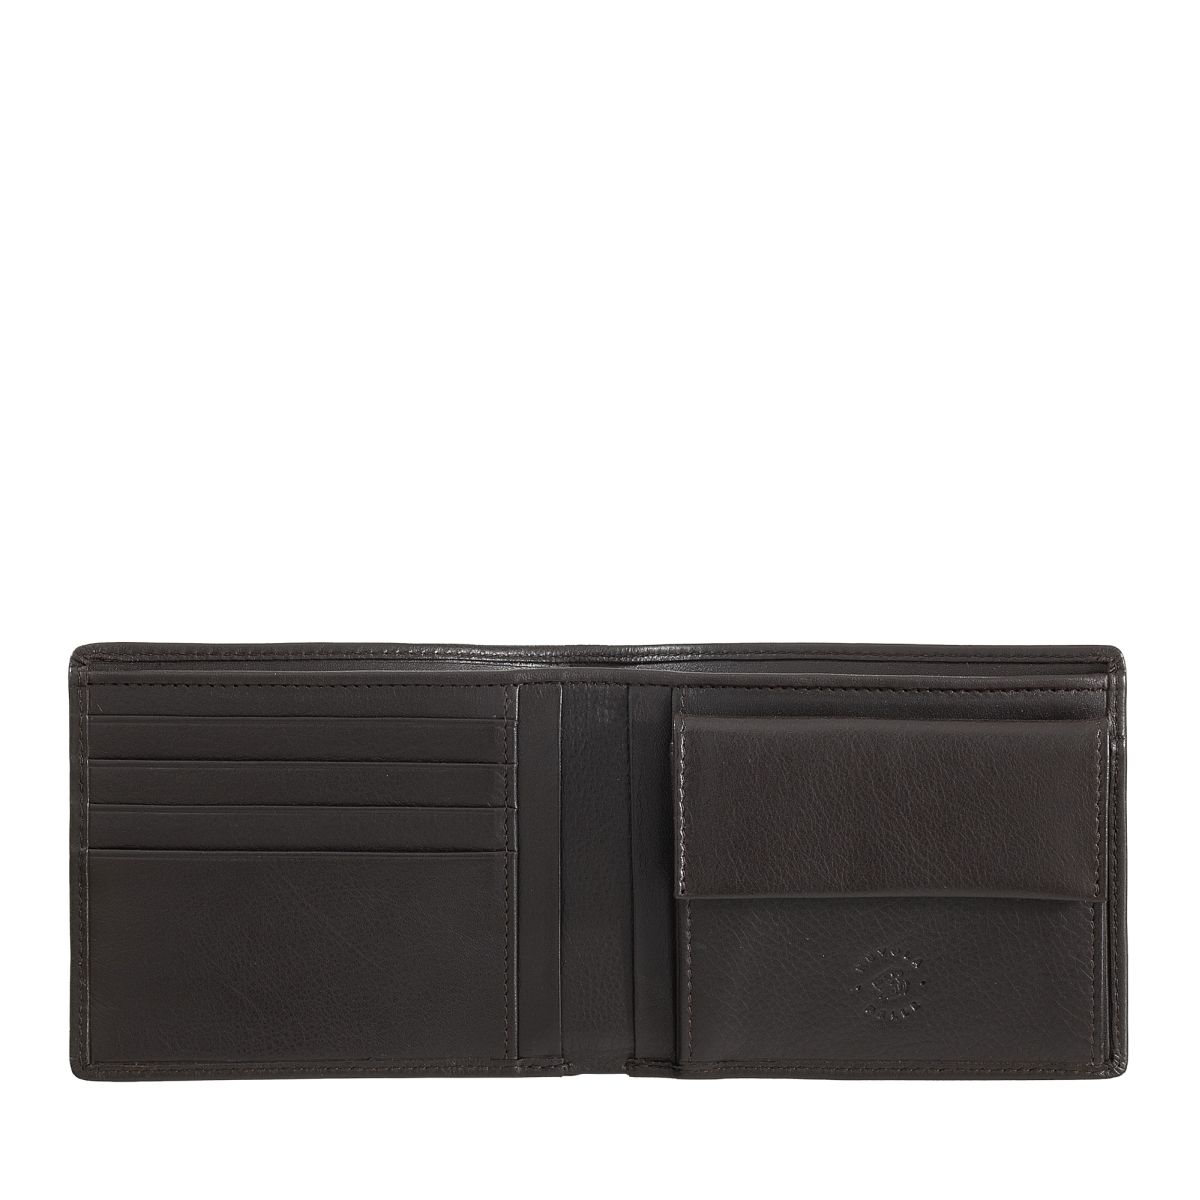 NUVOLA PELLE Slim Leather Wallet With Coin Pocket - Dark Brown